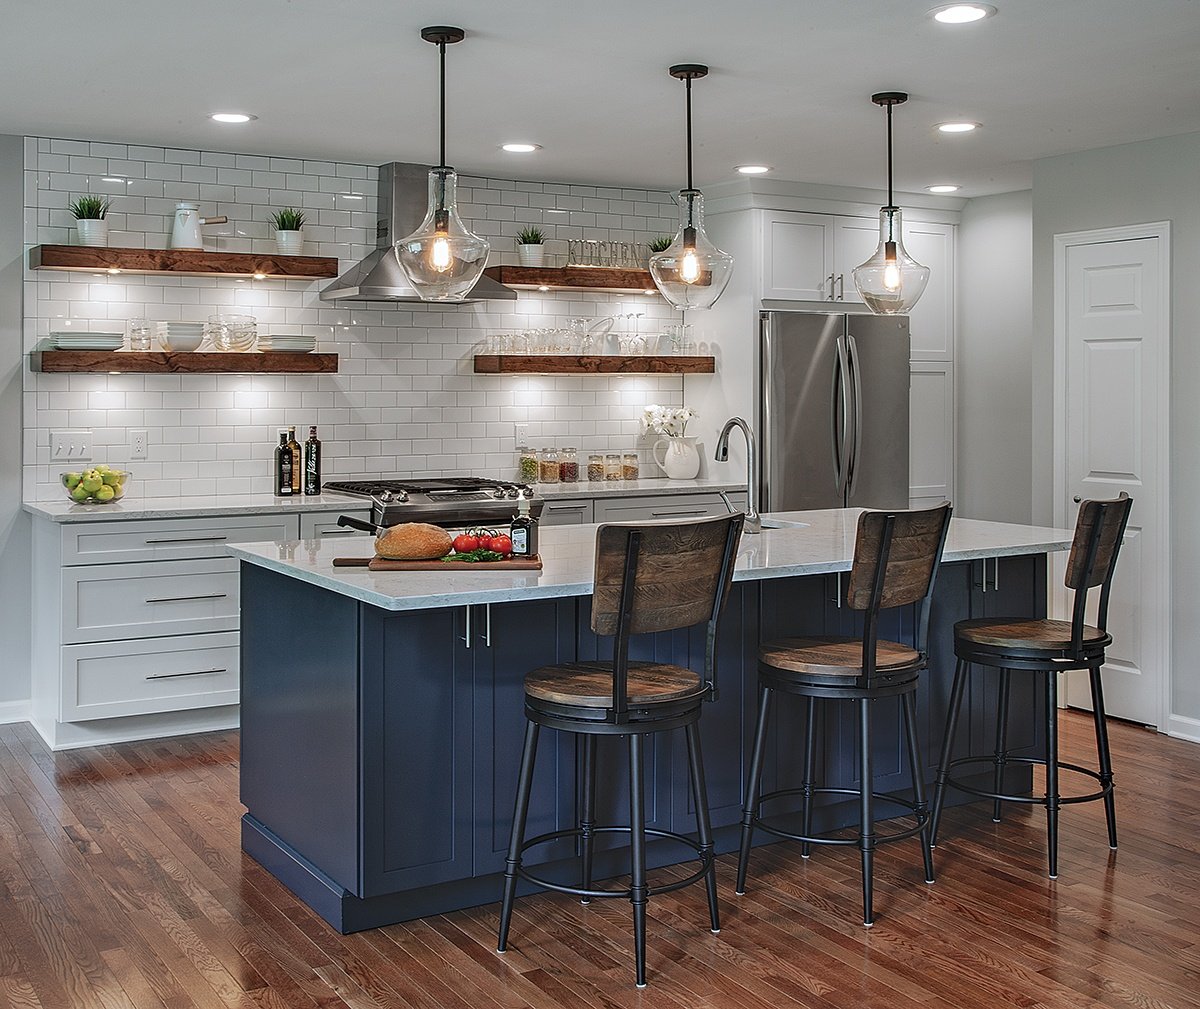 Do You Need Help Discovering Your Kitchen Design?”